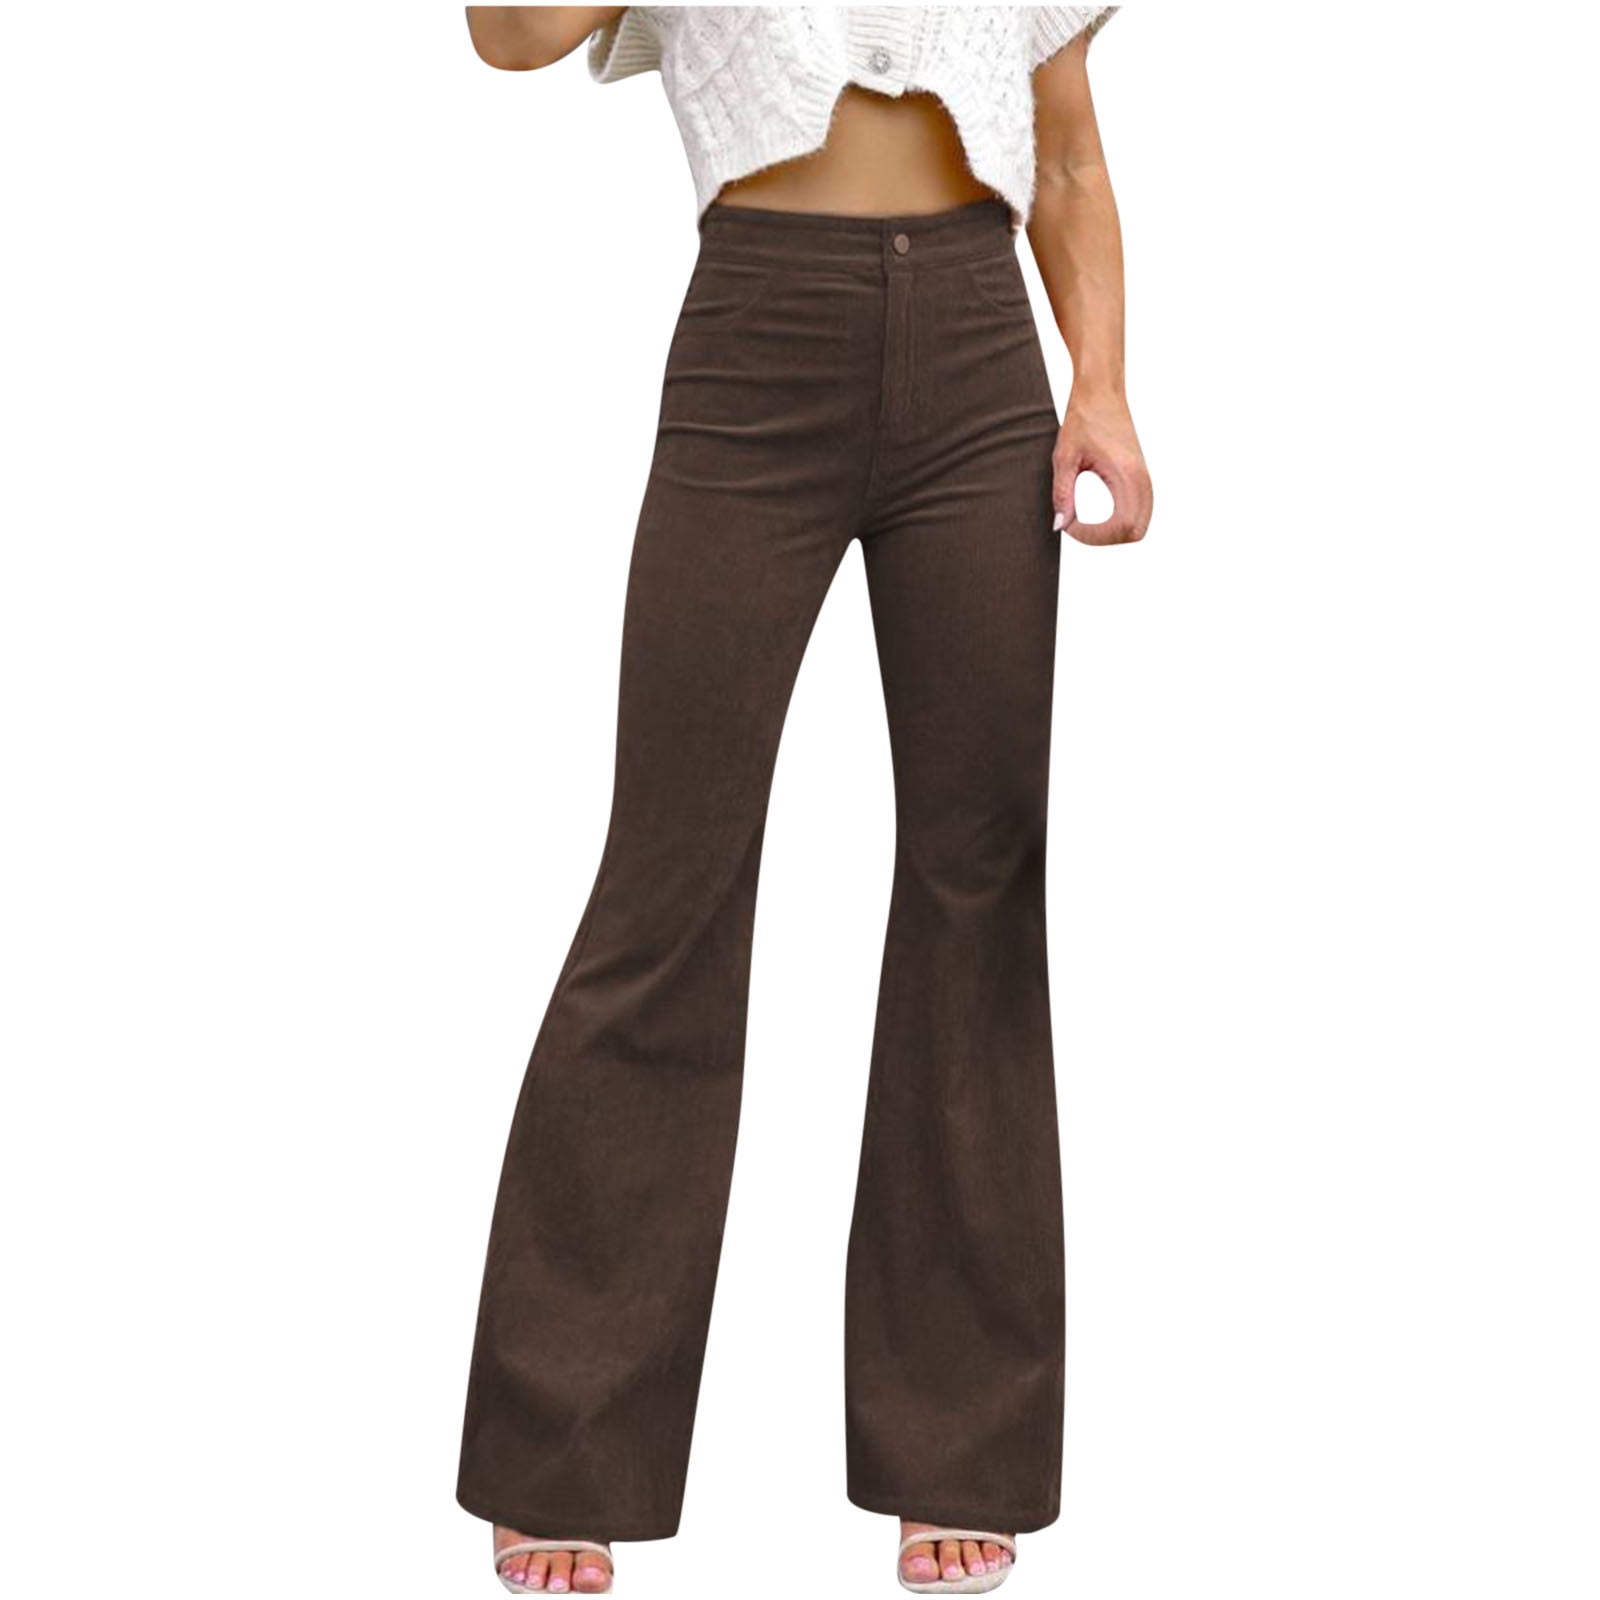 Hfyihgf Plus Size Corduroy Flare Pants for Women Vintage High Waisted Pants  Straight Leg Casual Comfy Bell Bottom Trousers(Wine,S) 